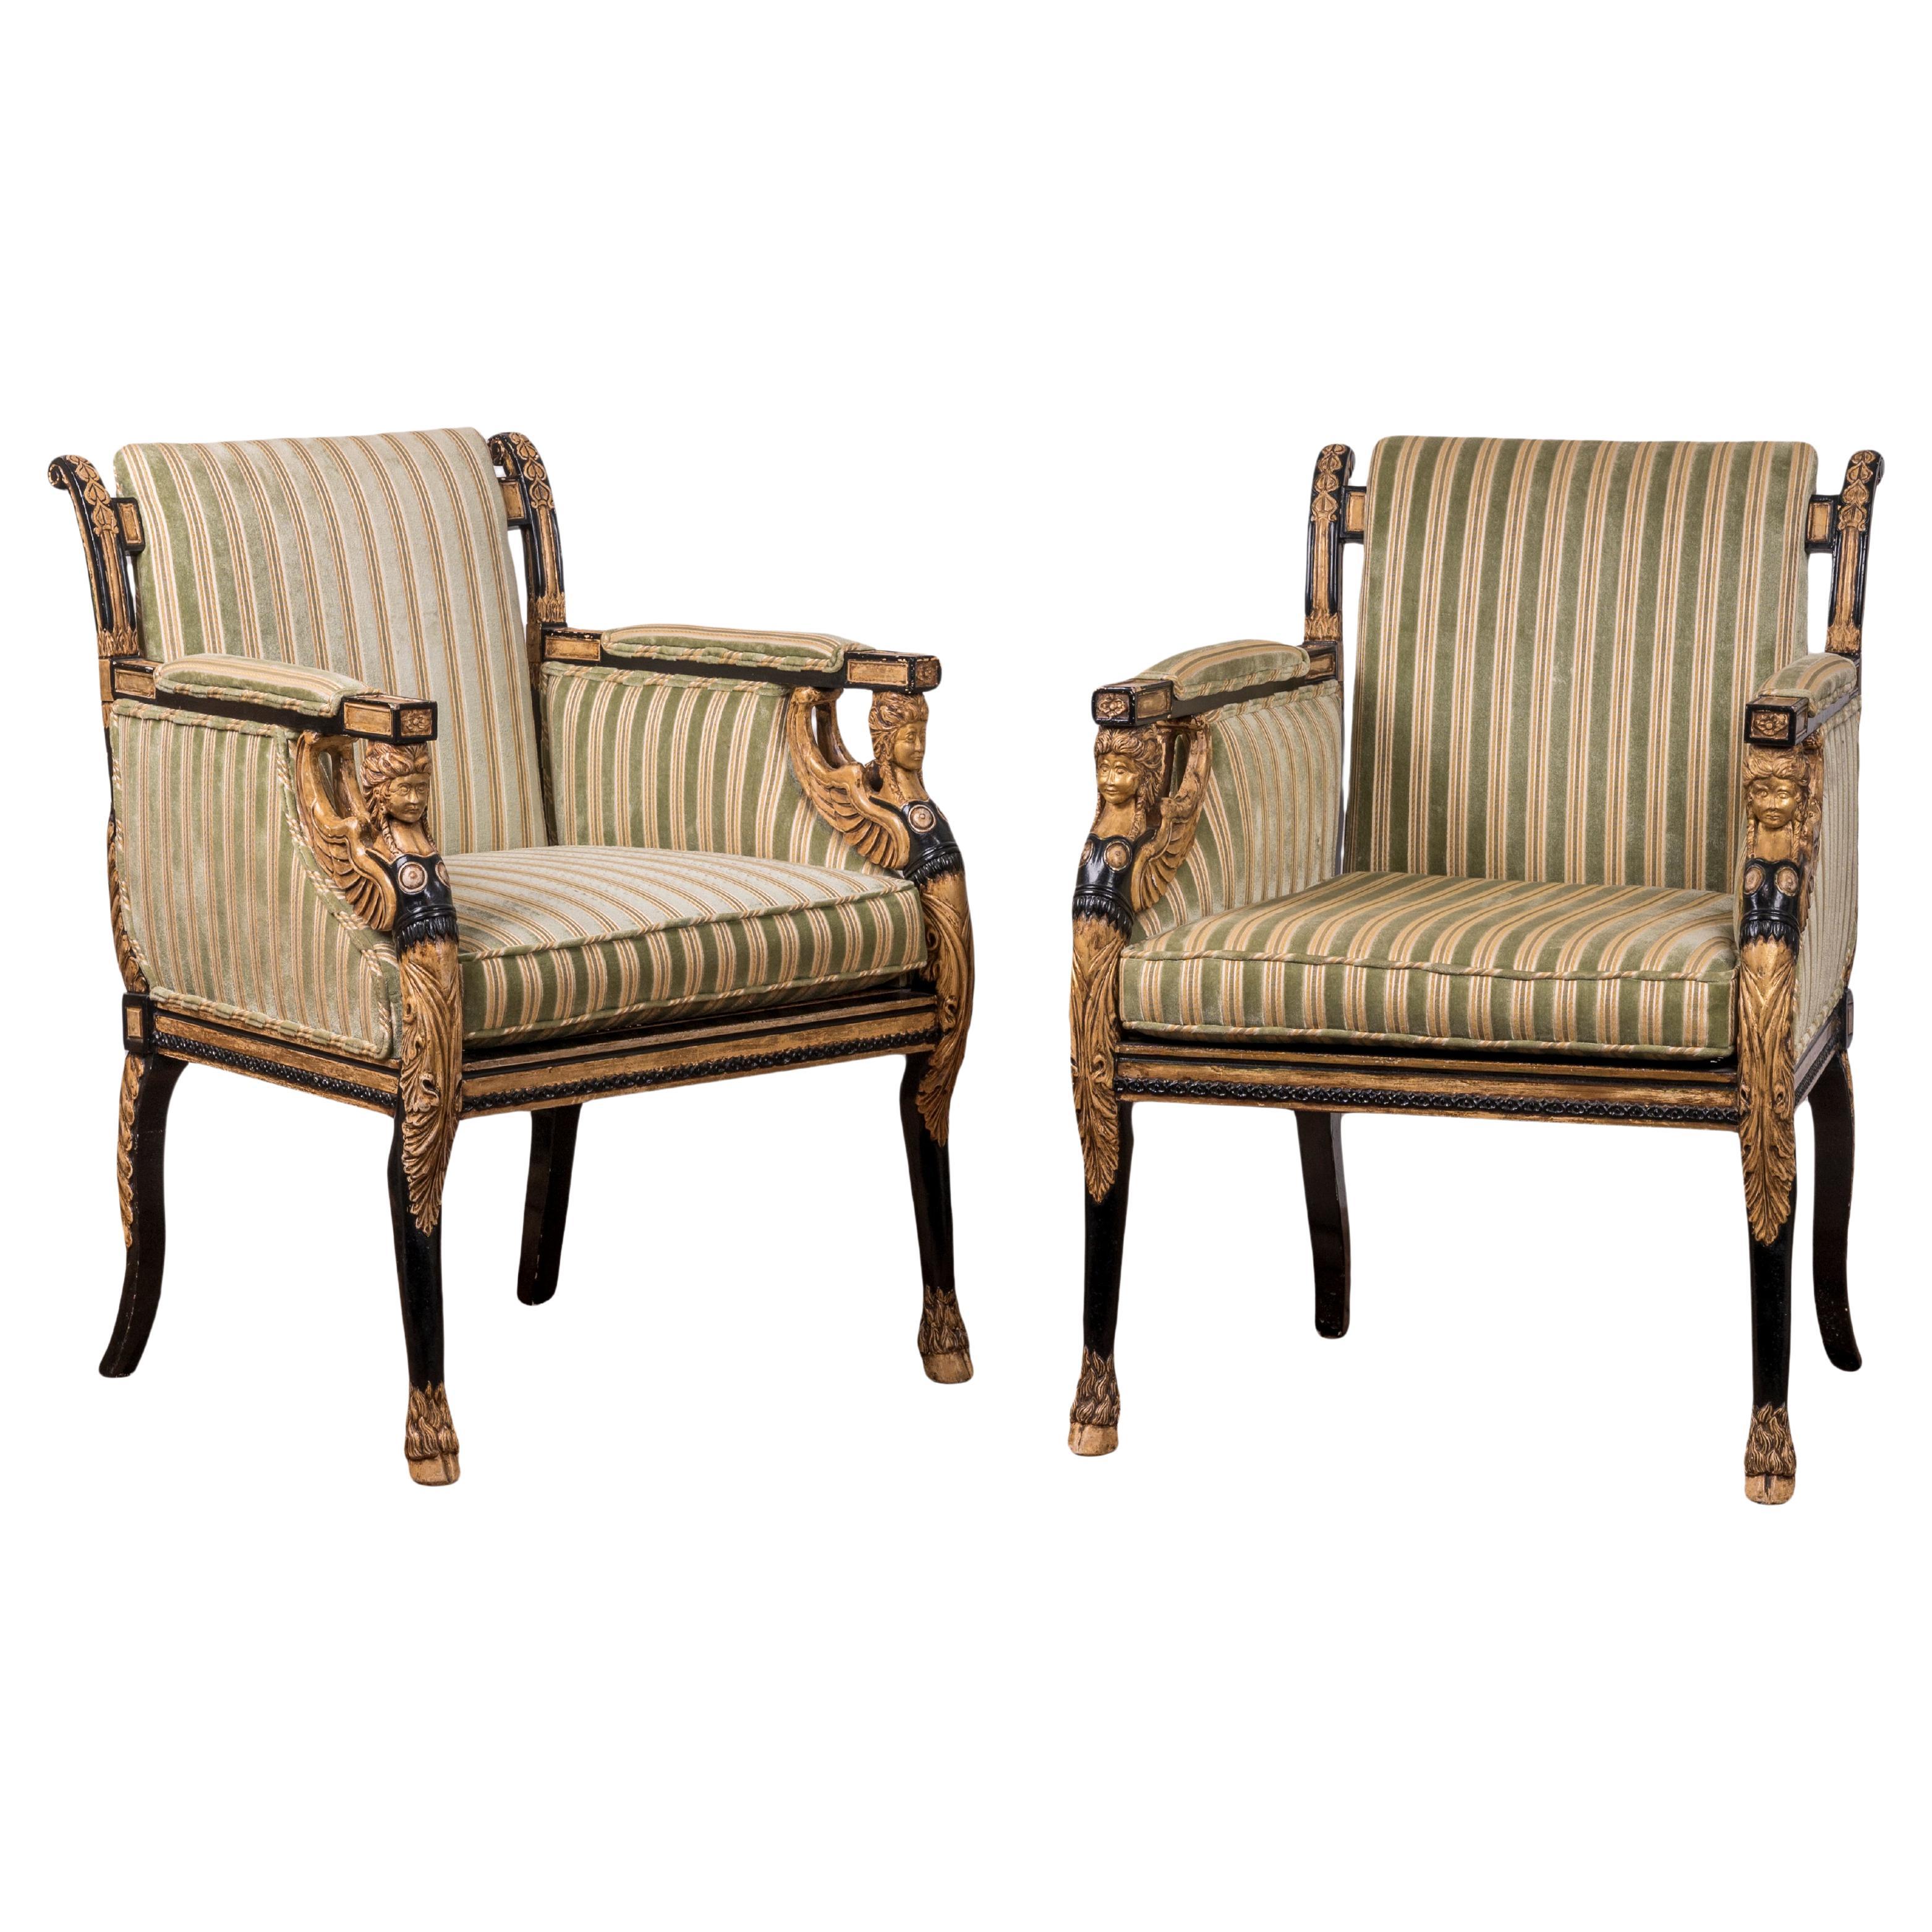 English Regency Style Ebonized and Parcel Gilt Chairs - A Pair